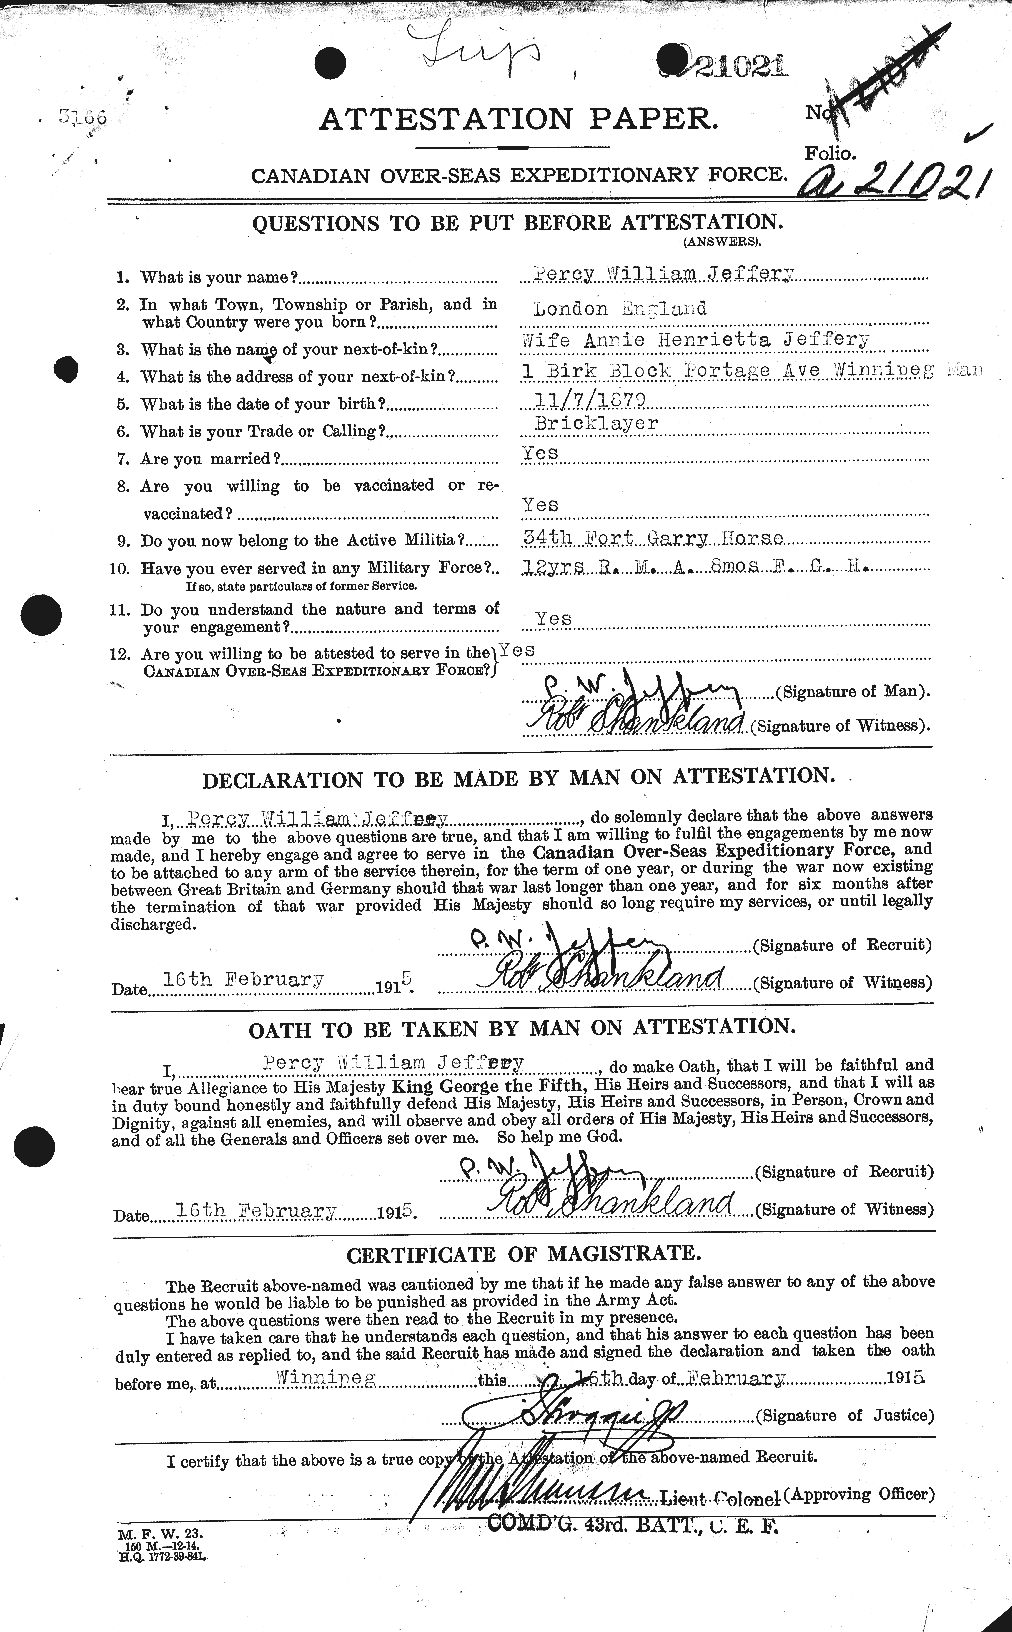 Personnel Records of the First World War - CEF 417793a